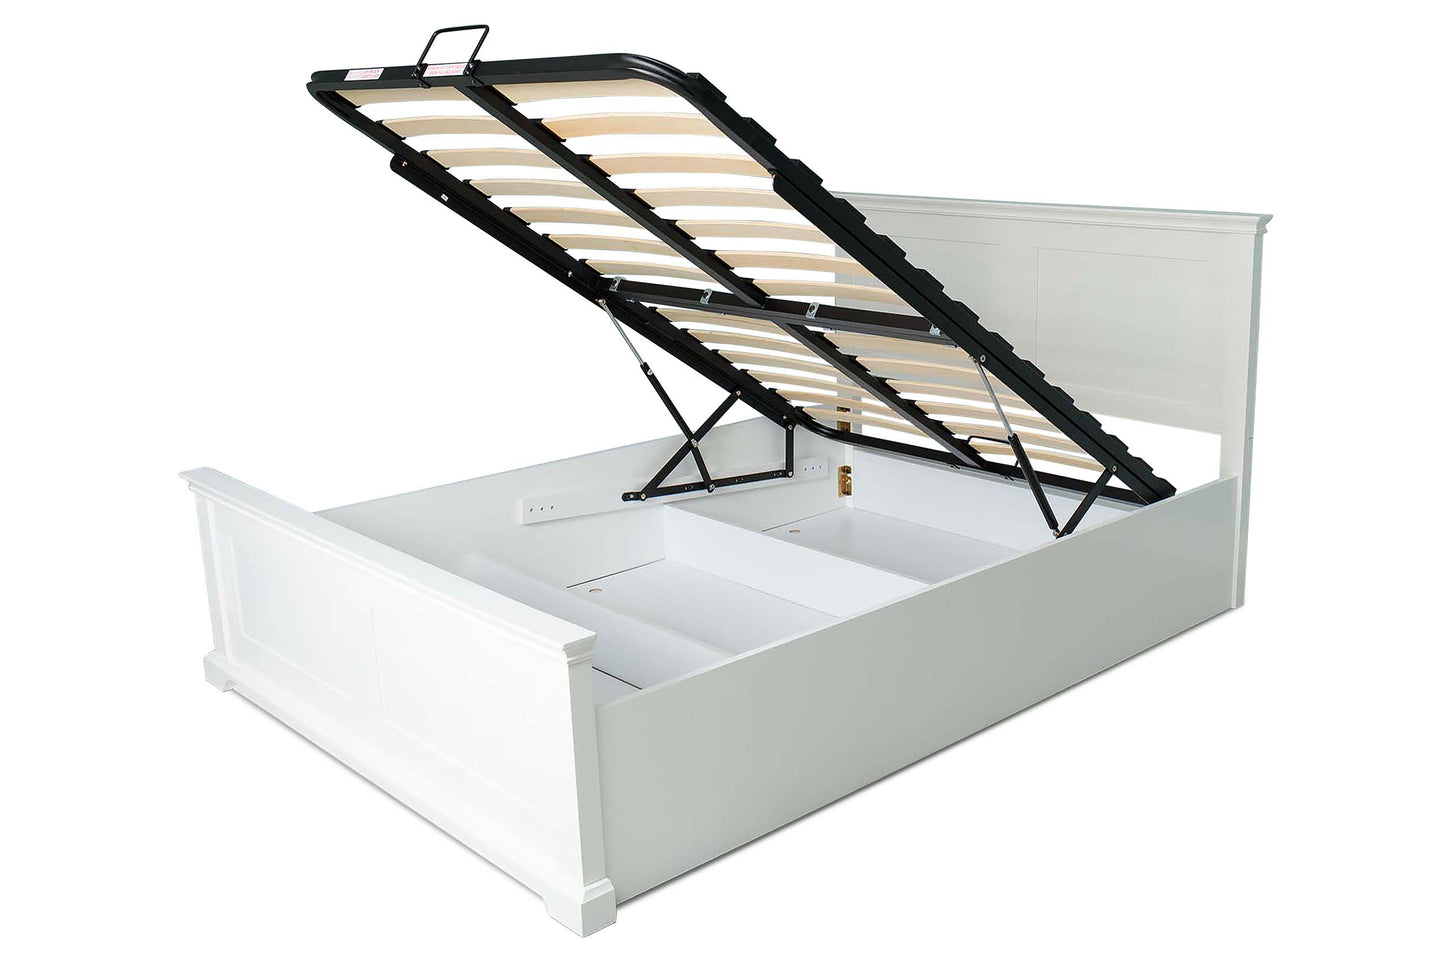 Chambery Bright White Ottoman Storage Bed Frame - 4ft6 Double